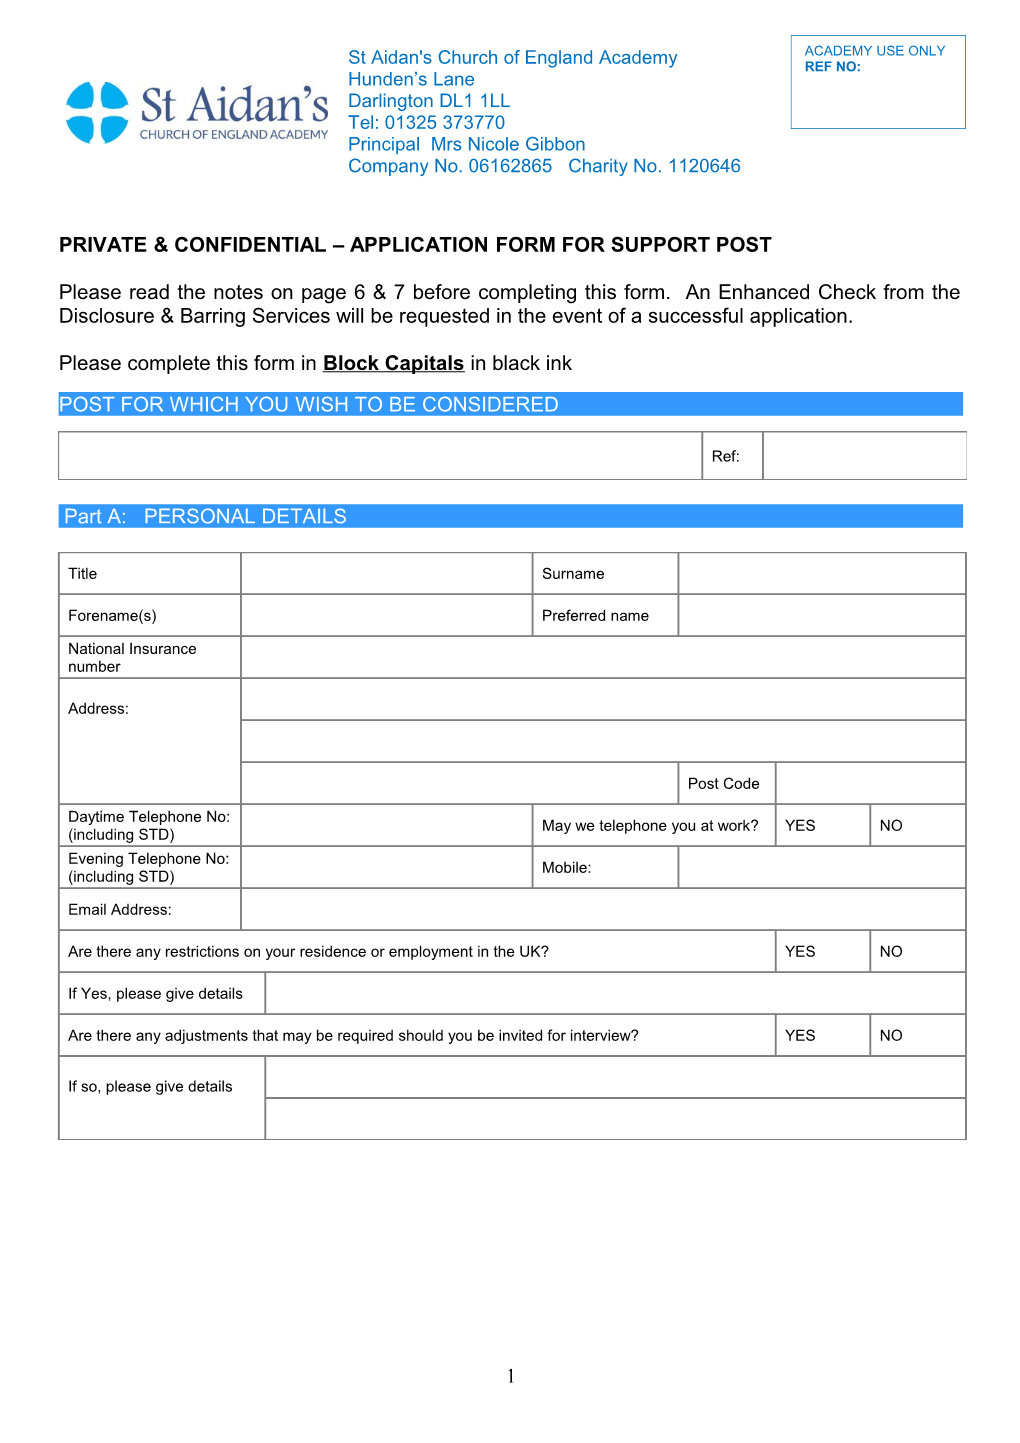 Private & Confidential Application Form for Support Post